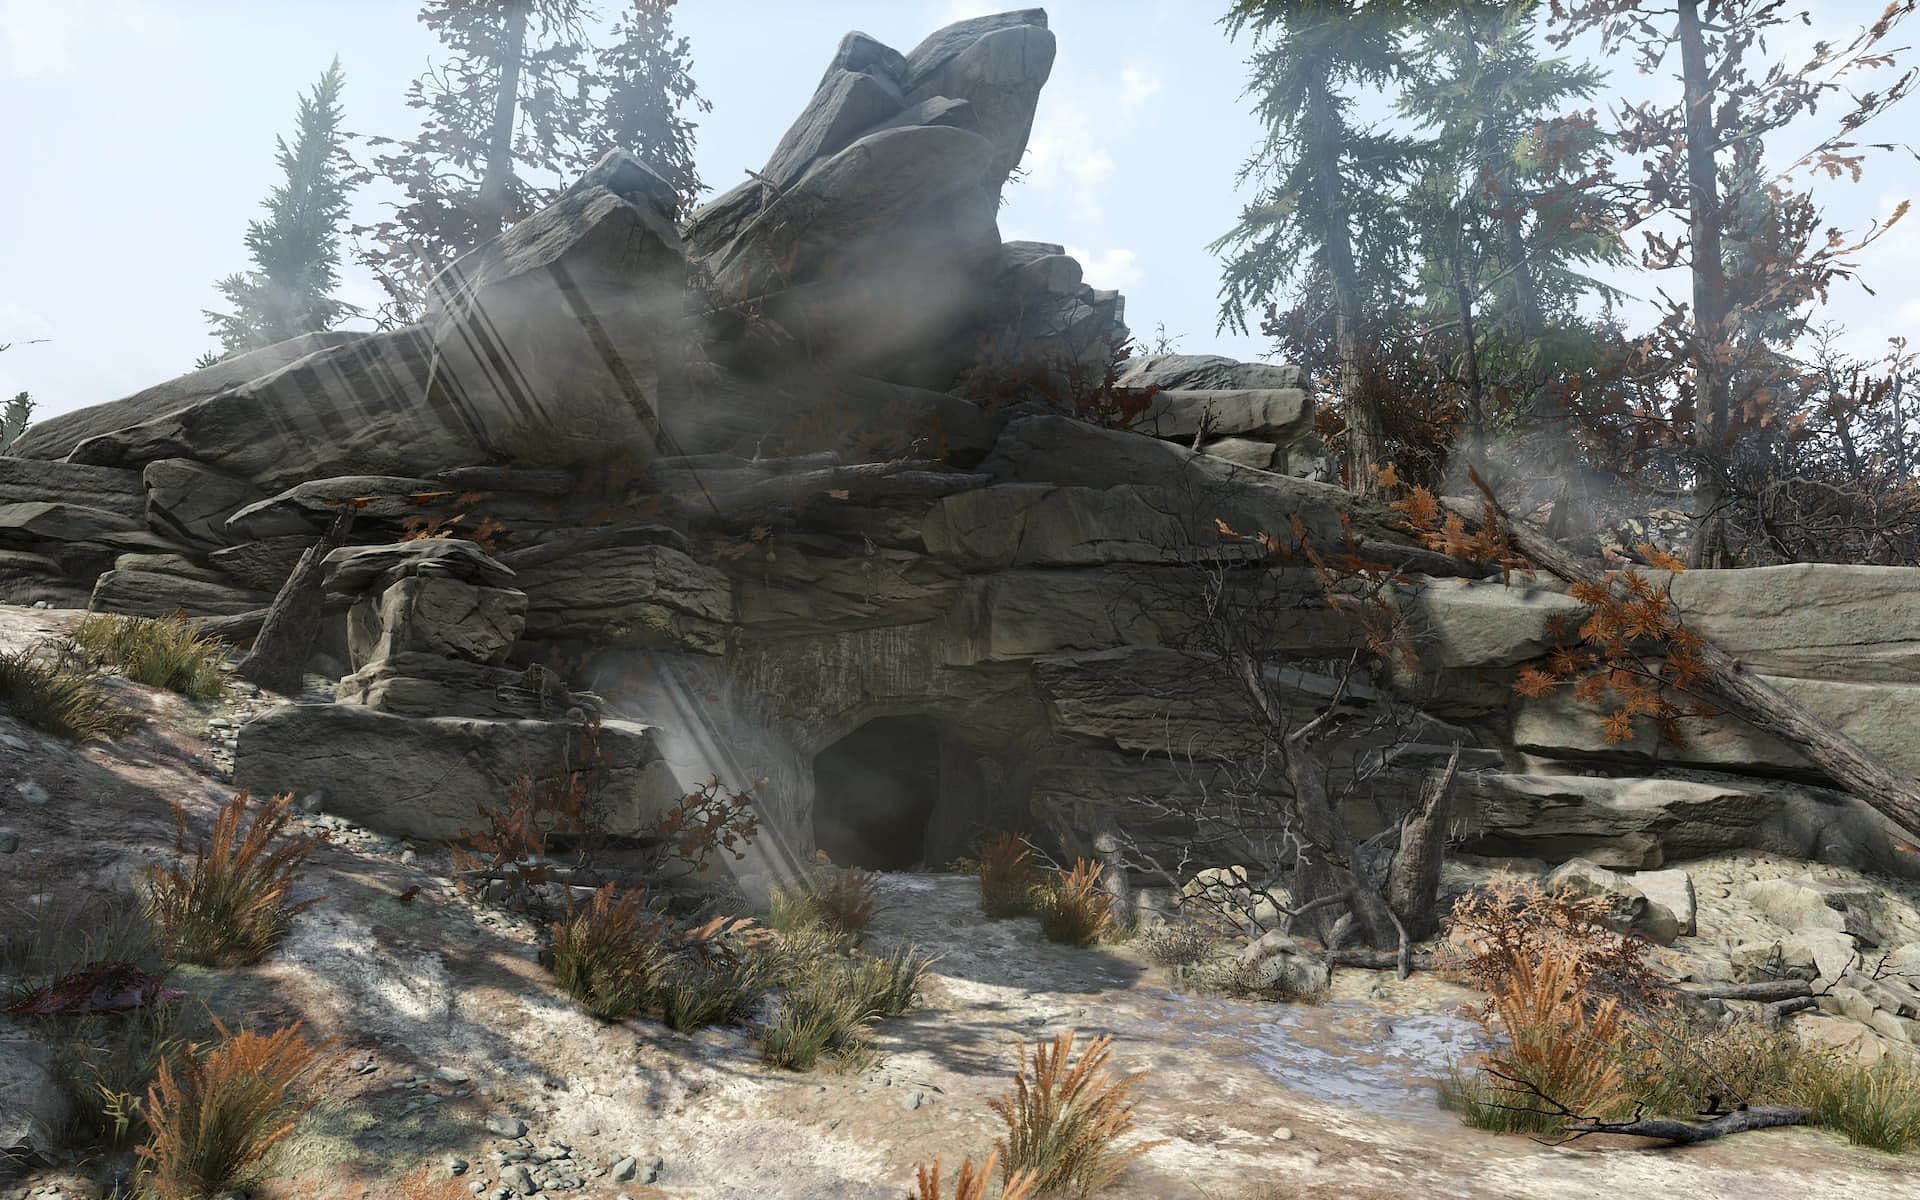 The Wendigo Cave is home to many ghouls in Fallout 76 (Image via Bethesda)